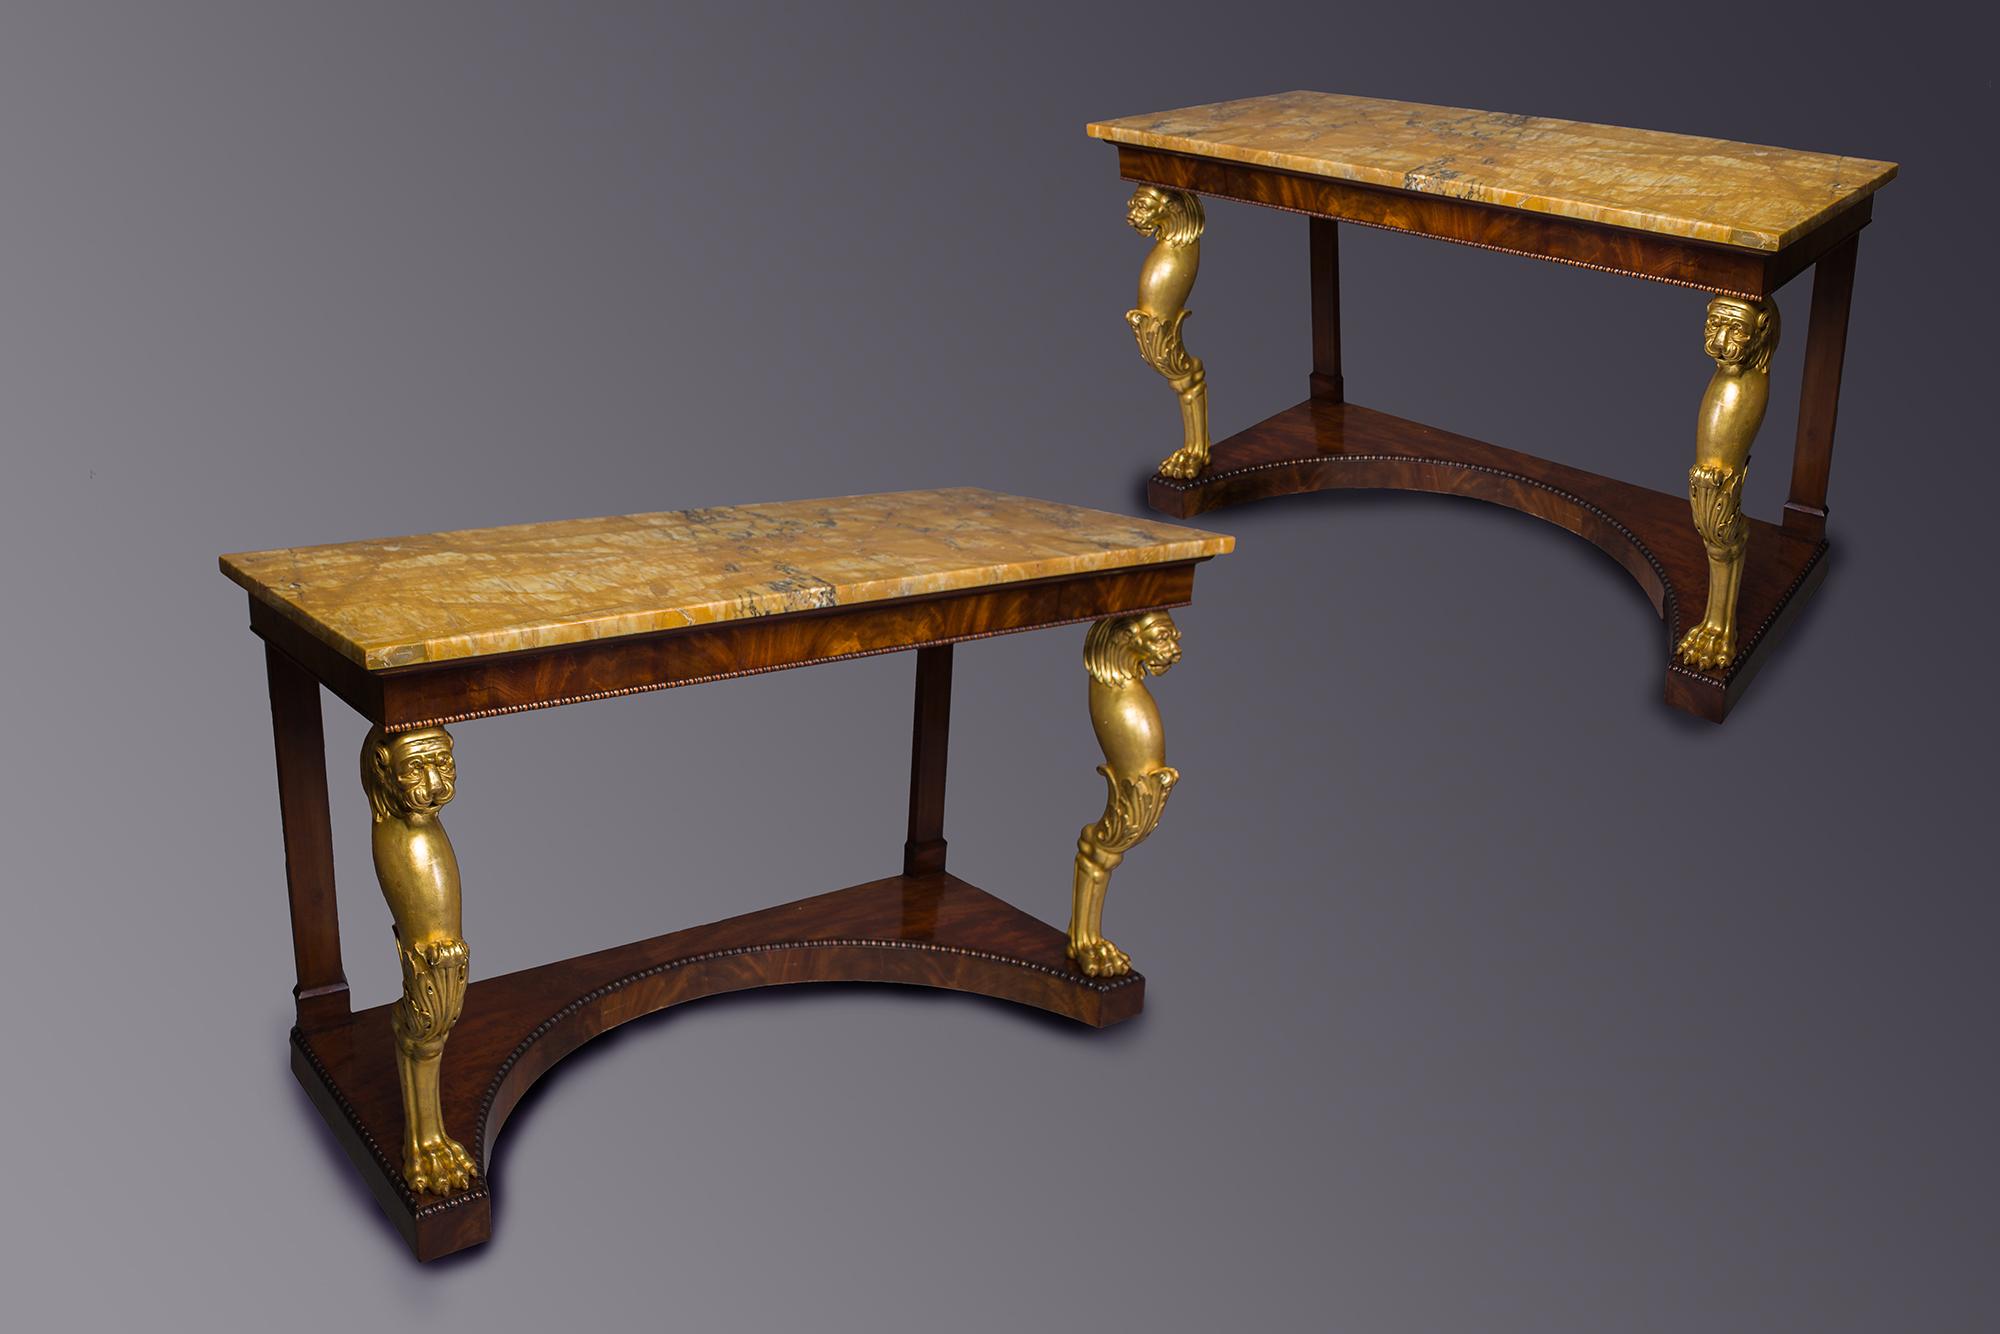 A Fine Pair of Regency Gilt-wood and mahogany console tables
The Original rectangular Sienna marble tops, above a moulded lip,
above a flamed mahogany veneered frieze, with a beaded moulding, 
resting on carved gilt-wood Lion monopodia legs with